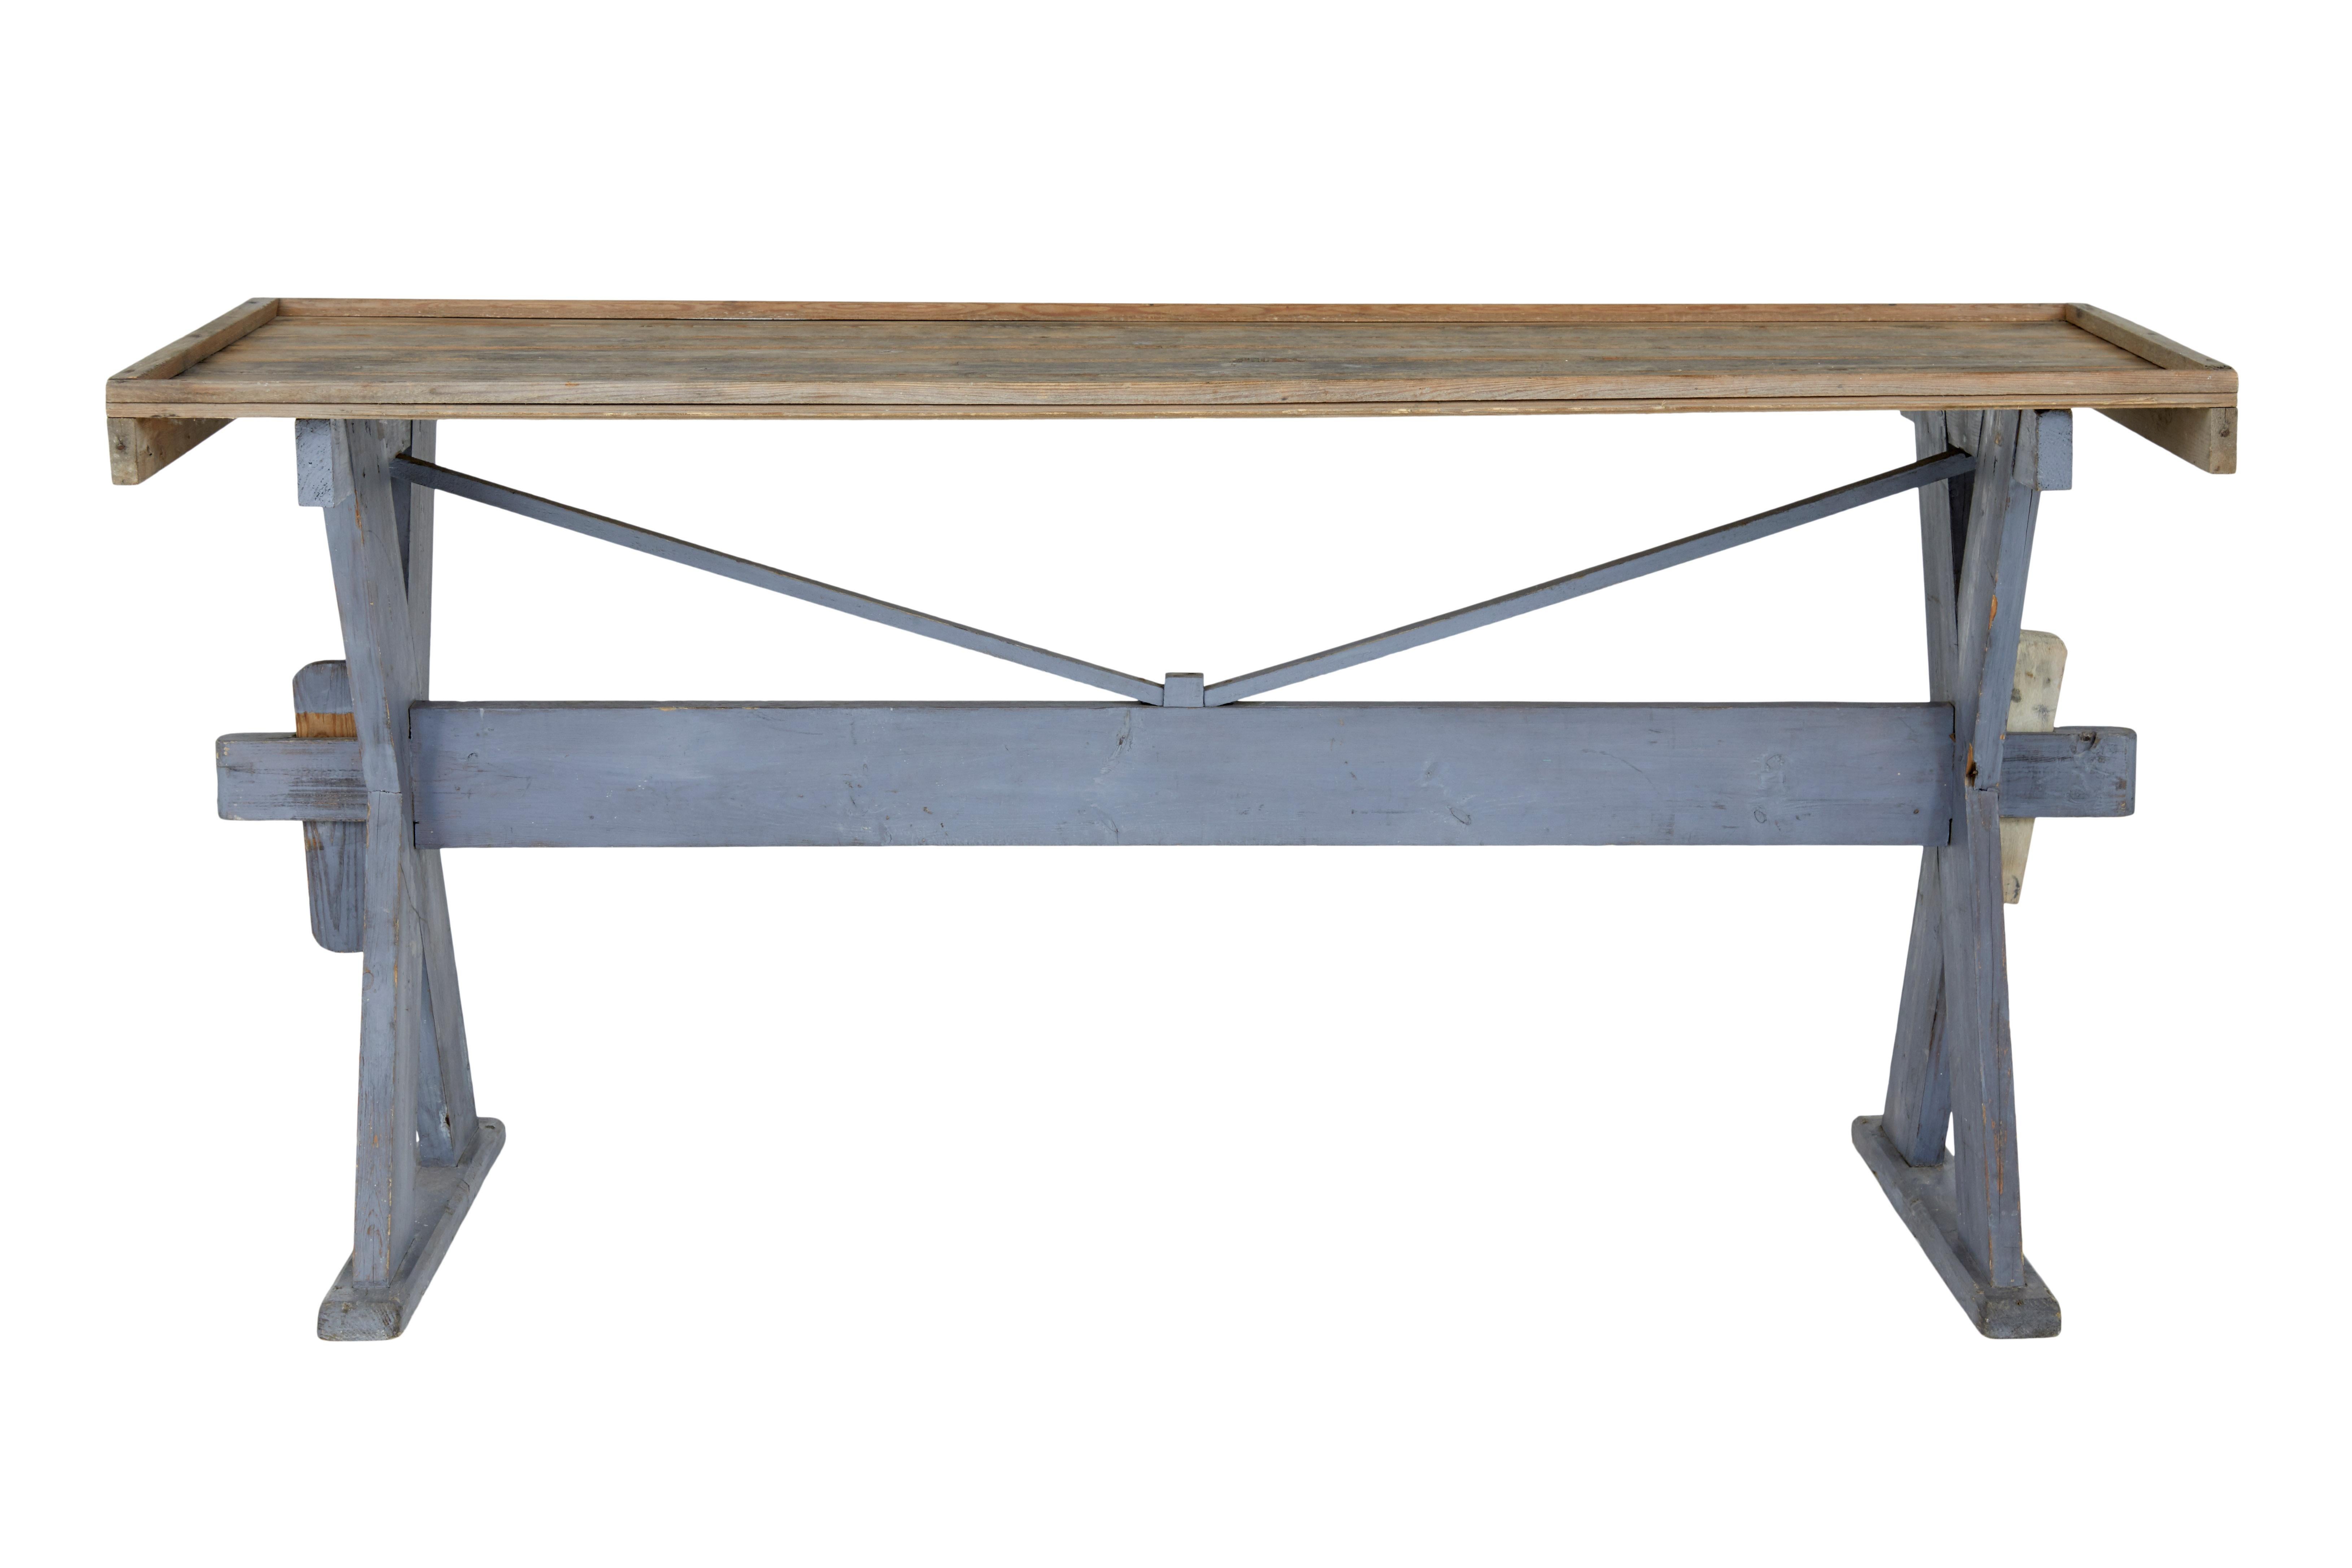 19th century pine X-frame painted work table, circa 1890.

Tongue and groove pine top with raised table edge. Top stands on a X-frame painted base held in place by stretcher and pegs.

Rustic Swedish piece, ideal for use in the conservatory or